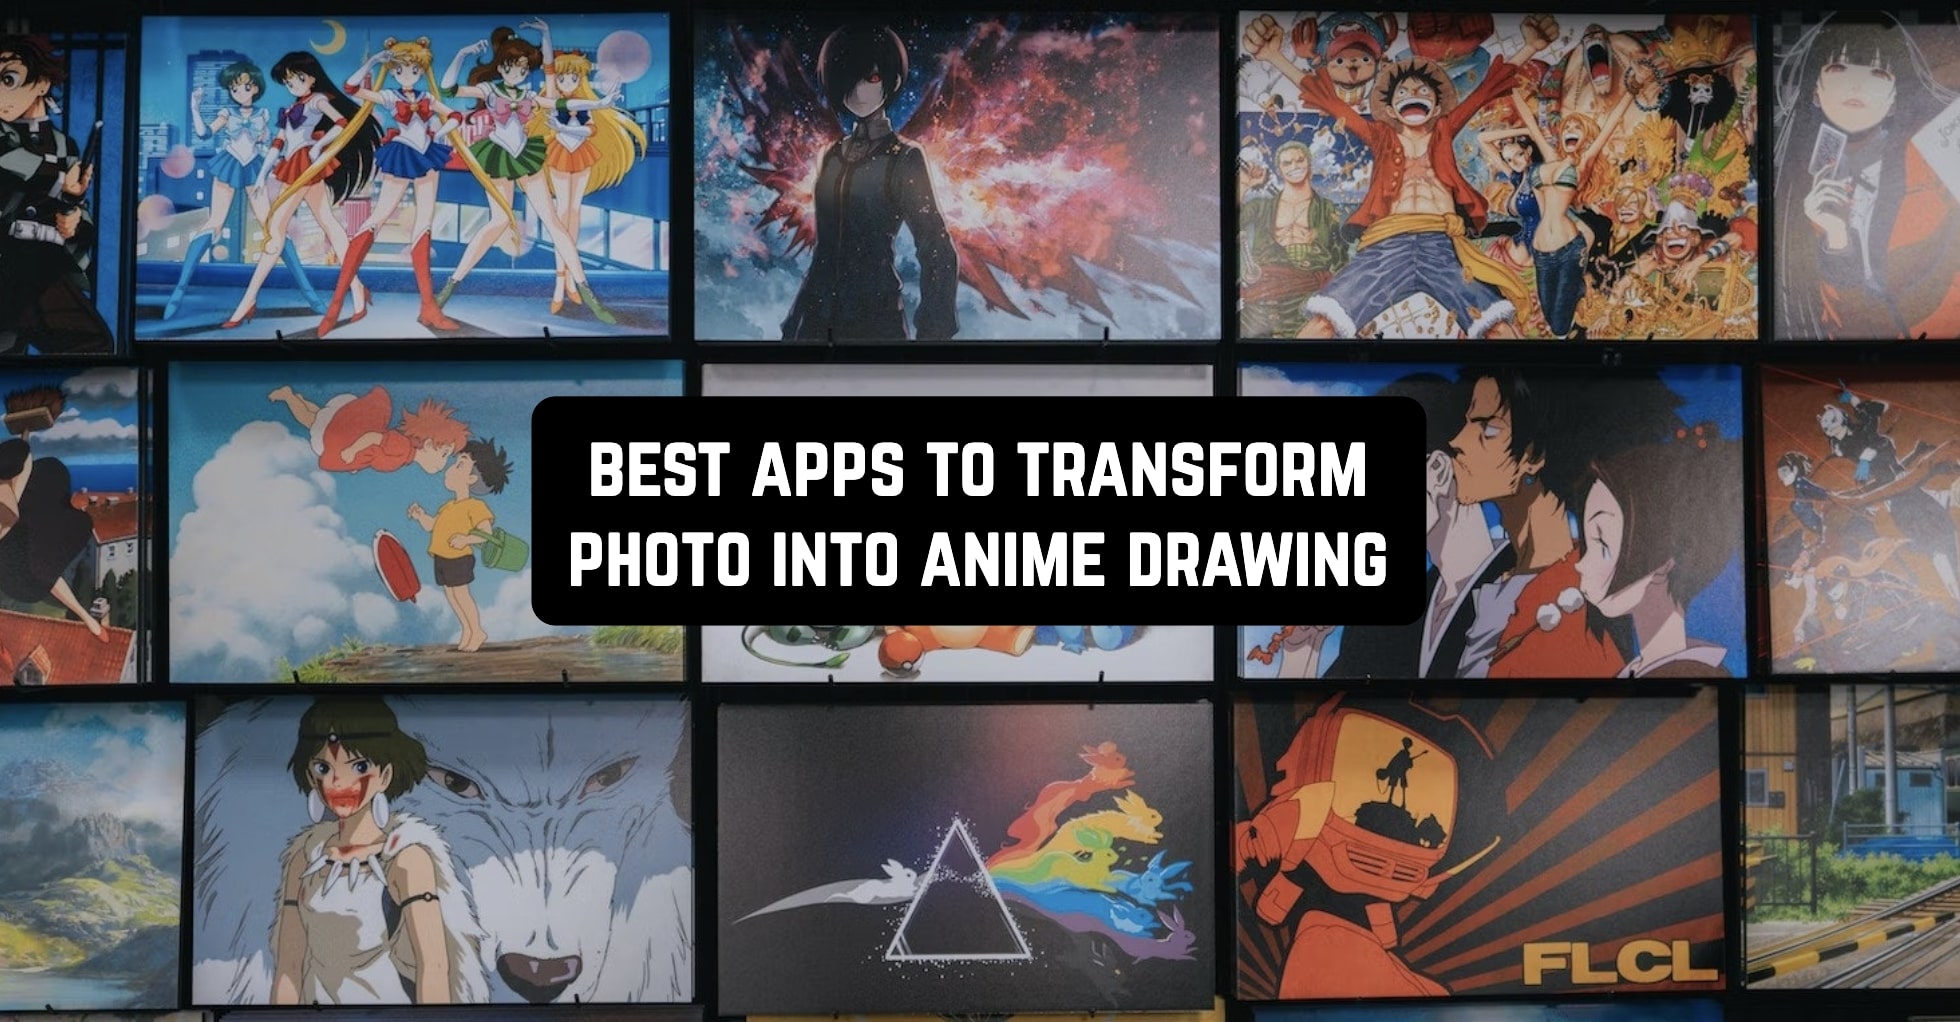 11 Best Apps To Transform Photo Into Anime Drawing | Free apps for Android  and iOS